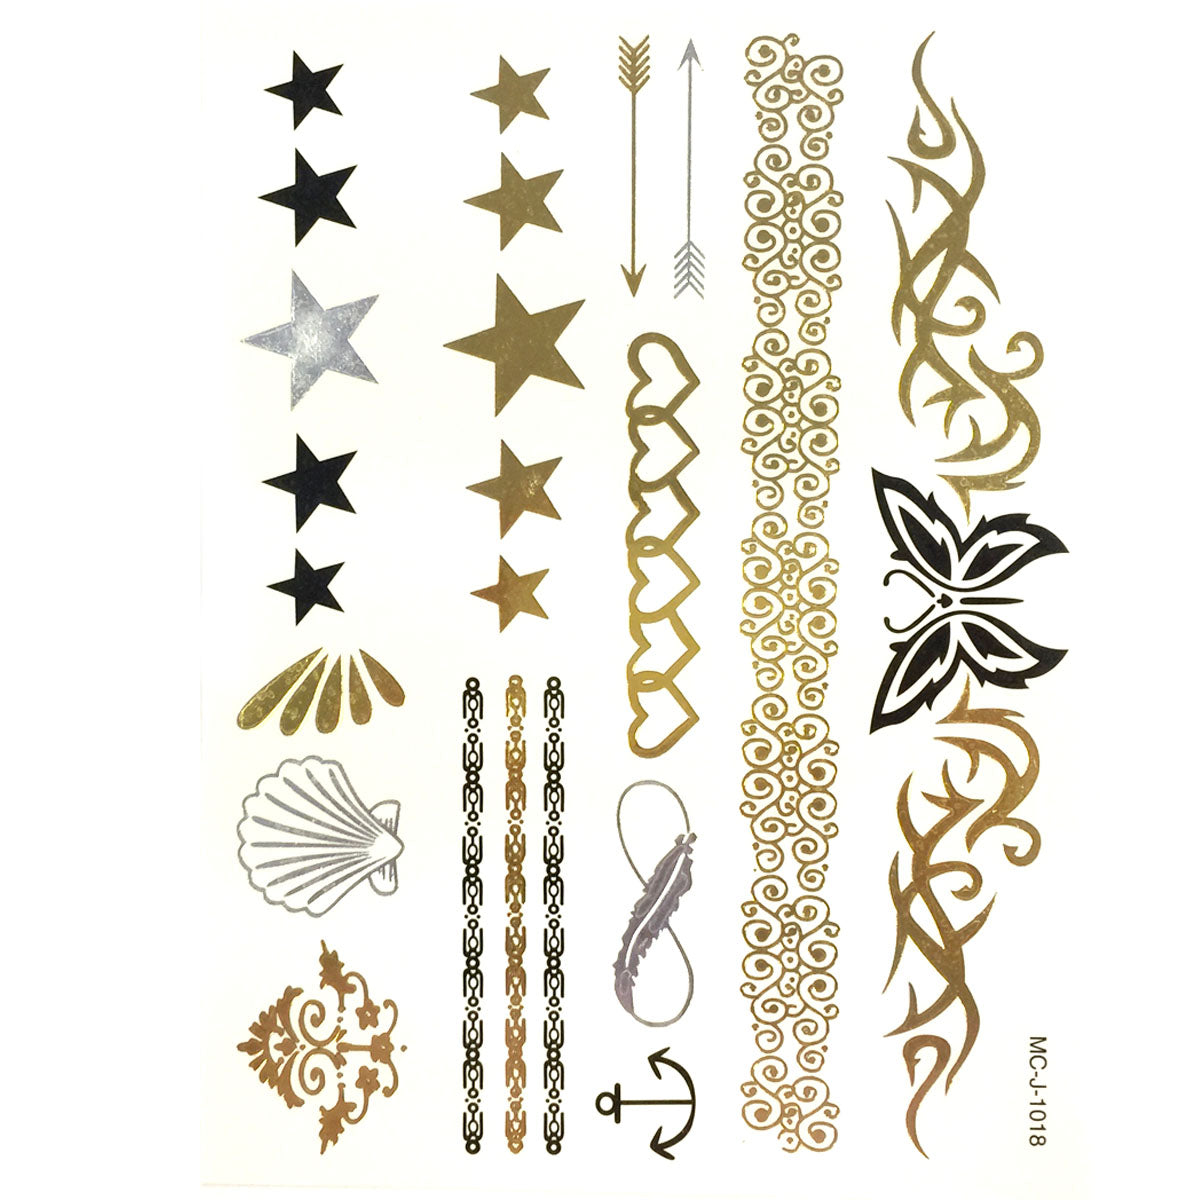 Wrapables Large Metallic Gold and Silver Temporary Tattoo Stickers